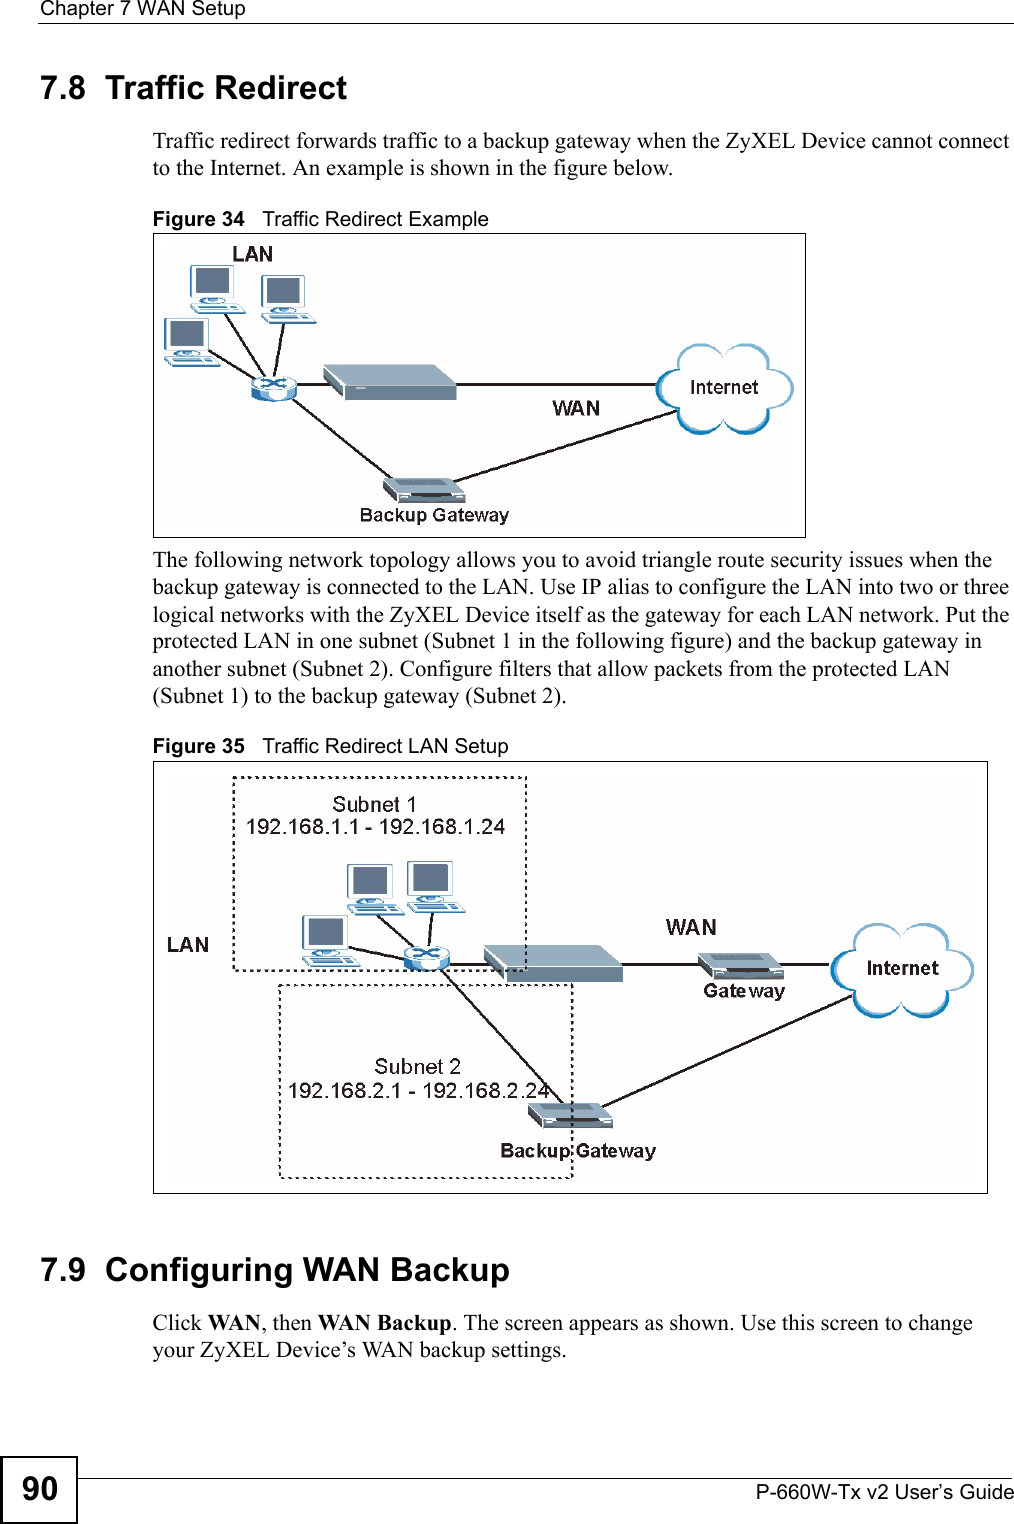 Chapter 7 WAN SetupP-660W-Tx v2 User’s Guide907.8  Traffic Redirect Traffic redirect forwards traffic to a backup gateway when the ZyXEL Device cannot connect to the Internet. An example is shown in the figure below.Figure 34   Traffic Redirect ExampleThe following network topology allows you to avoid triangle route security issues when the backup gateway is connected to the LAN. Use IP alias to configure the LAN into two or three logical networks with the ZyXEL Device itself as the gateway for each LAN network. Put the protected LAN in one subnet (Subnet 1 in the following figure) and the backup gateway in another subnet (Subnet 2). Configure filters that allow packets from the protected LAN (Subnet 1) to the backup gateway (Subnet 2). Figure 35   Traffic Redirect LAN Setup7.9  Configuring WAN Backup Click WA N , then WAN Backup. The screen appears as shown. Use this screen to change your ZyXEL Device’s WAN backup settings. 